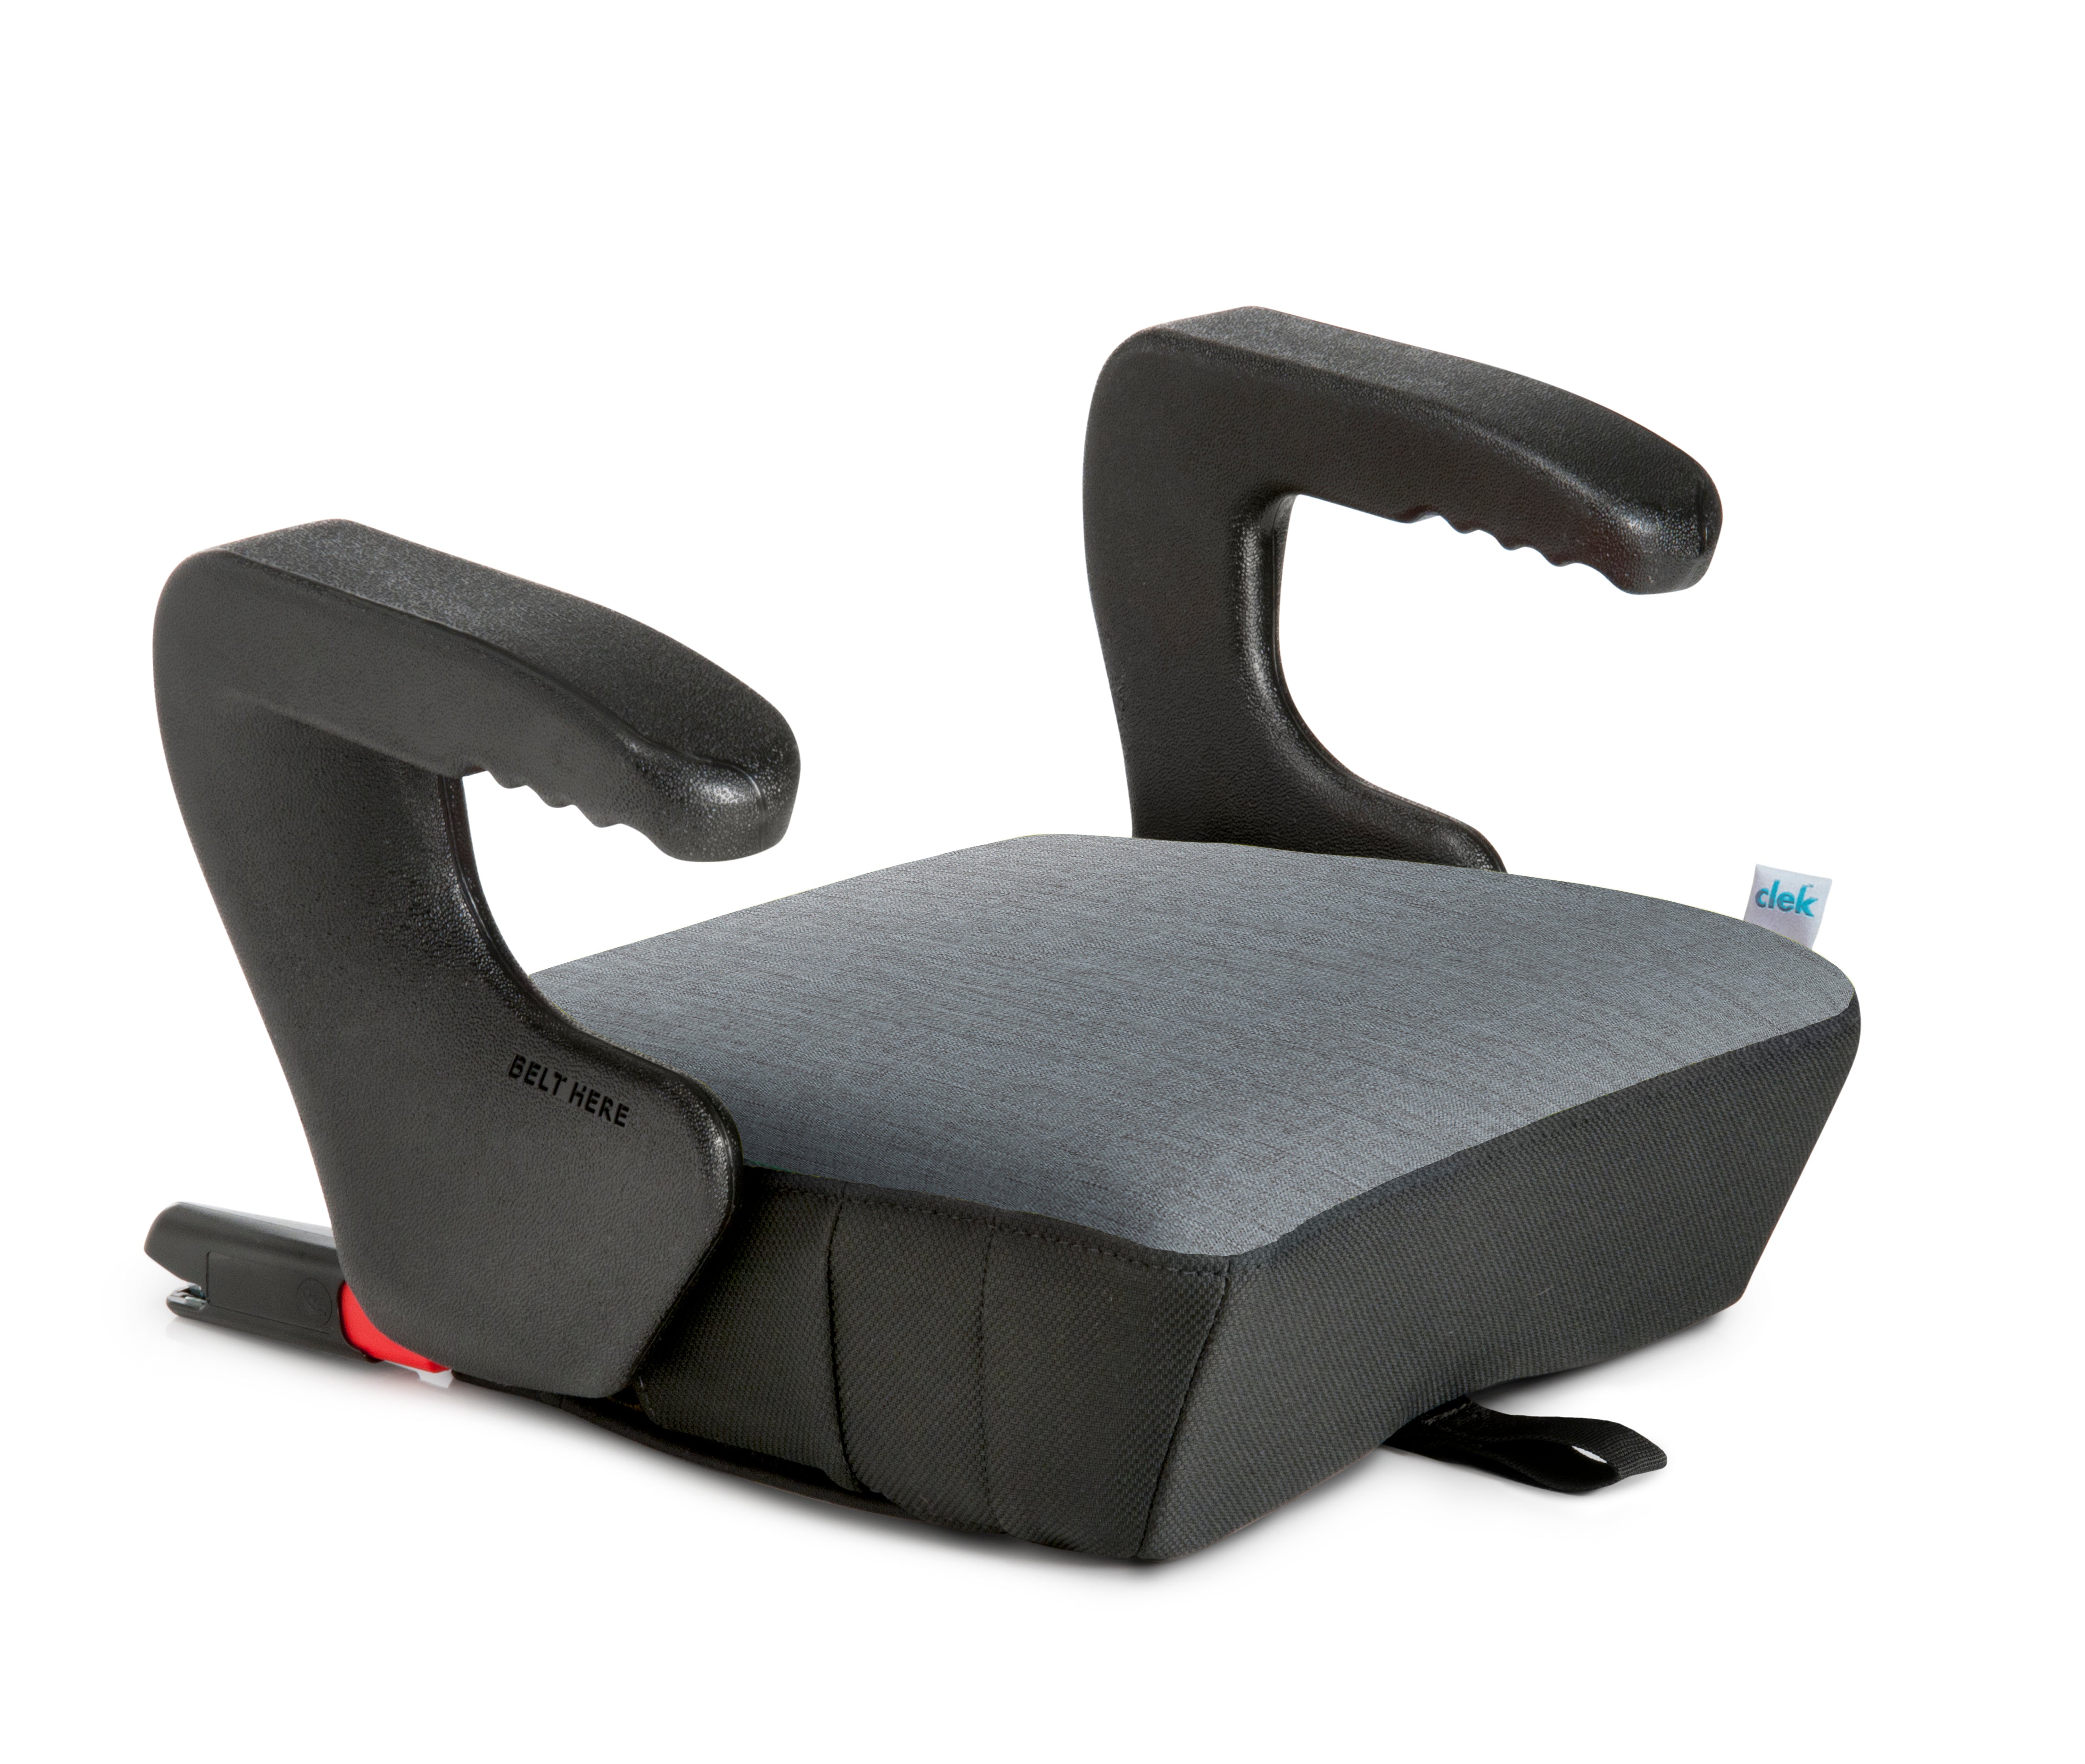 Clek Ollii Backless Booster Car Seat - Ships Free from Peppy Parents in  Ohio – PeppyParents Ohio